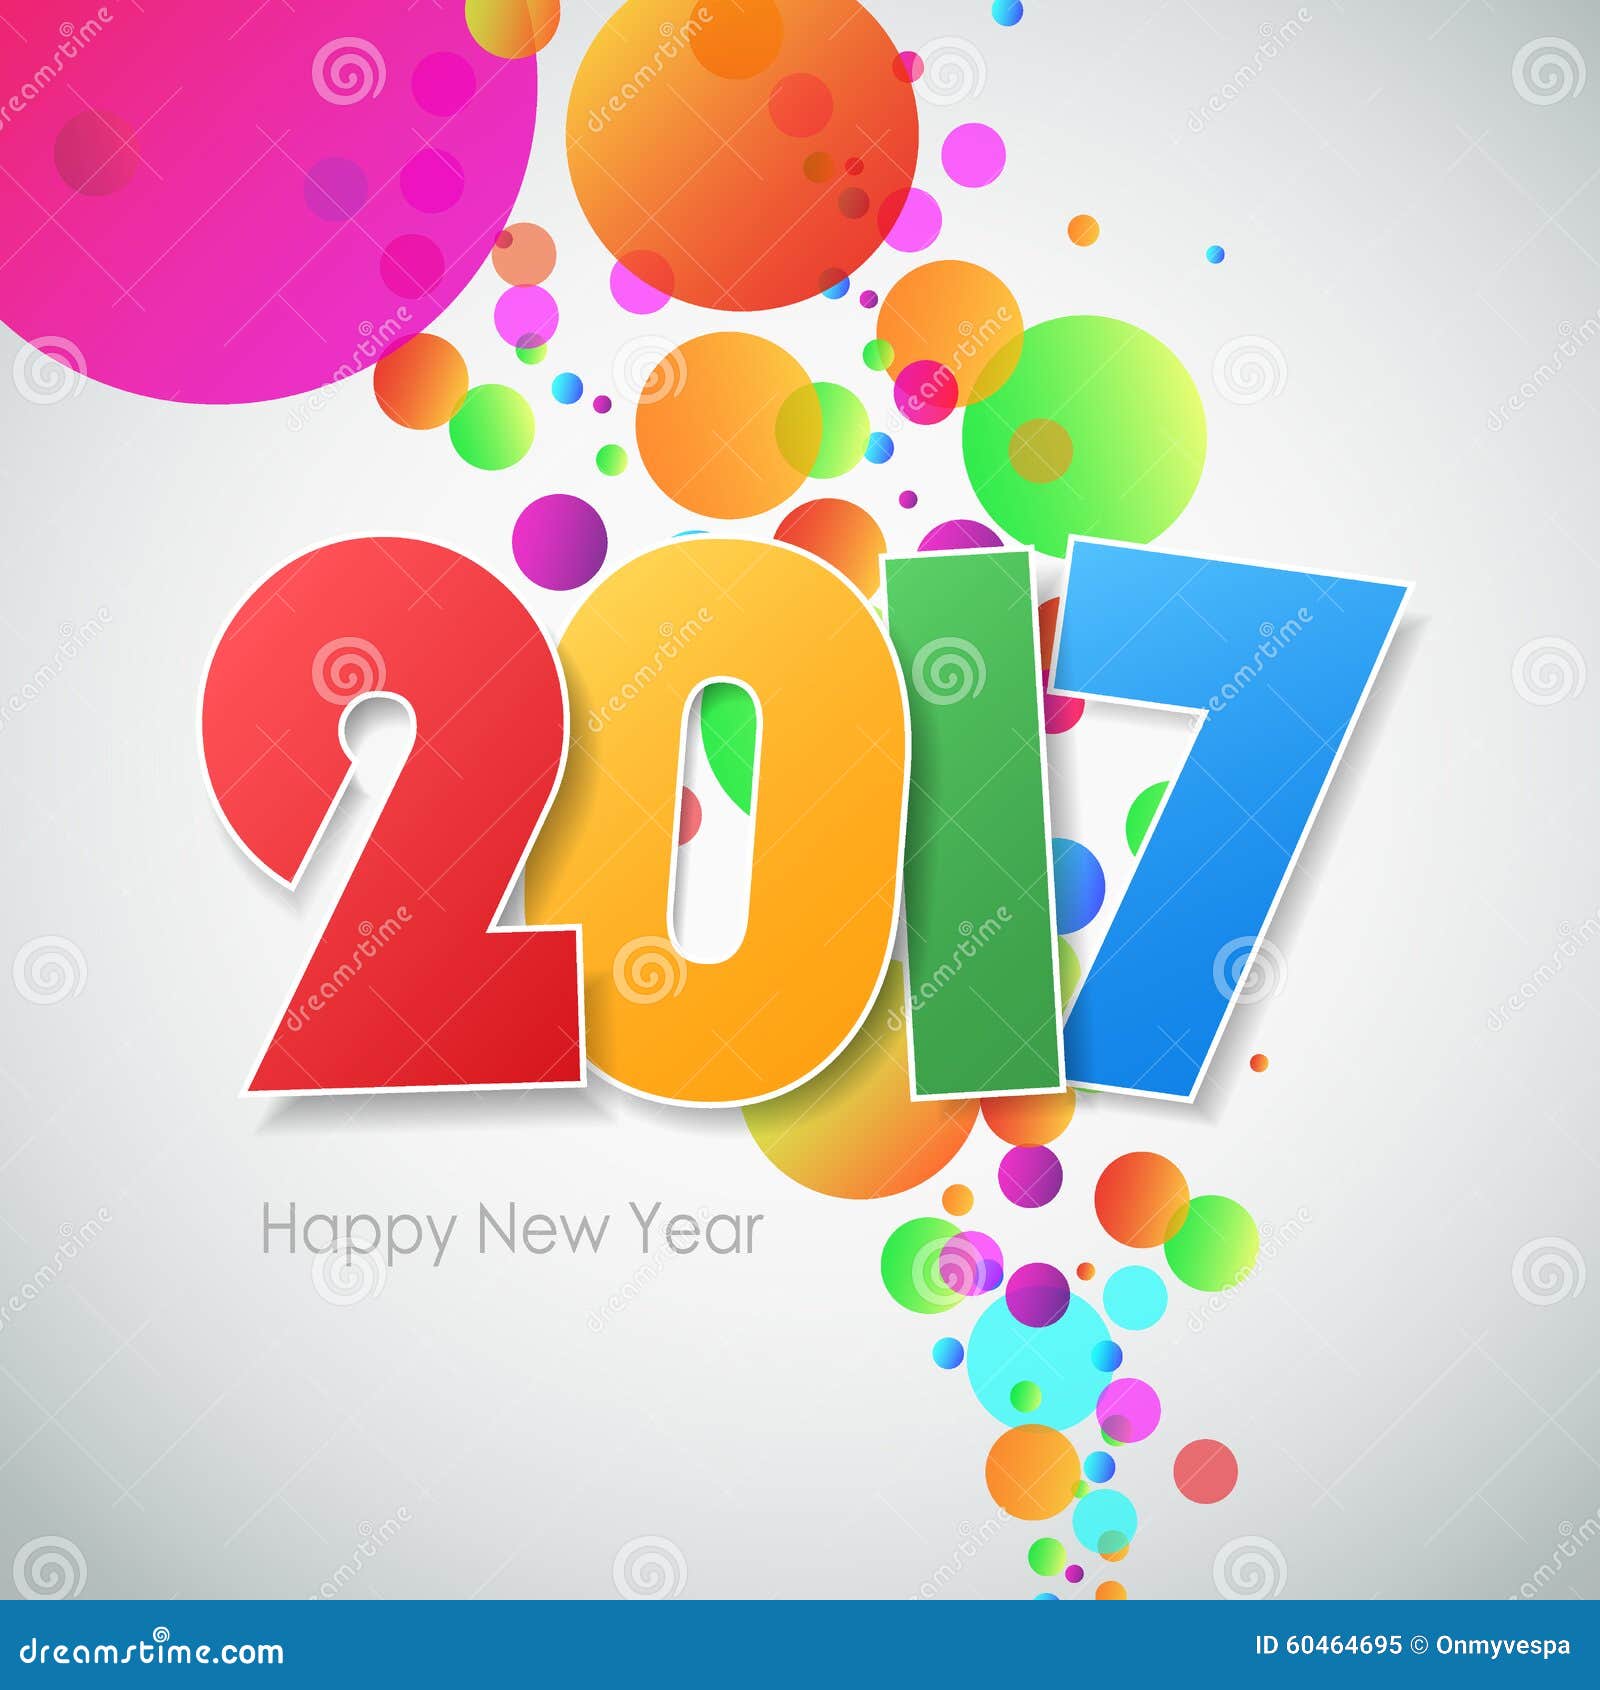 Happy New Year 2017 Greeting Card Stock Vector Illustration Of